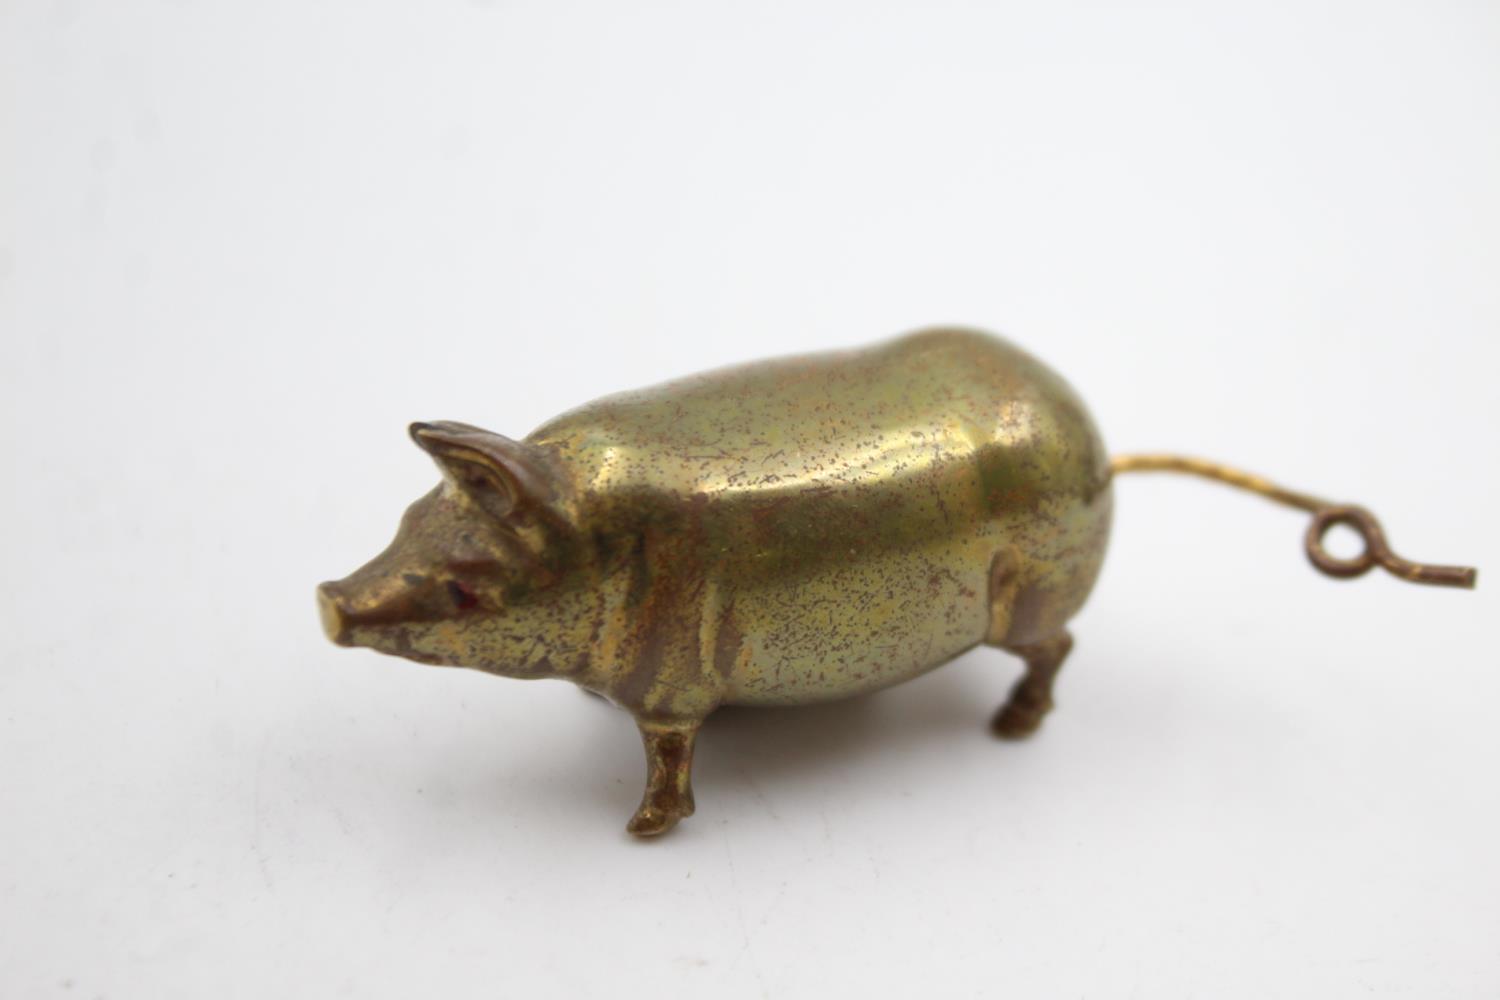 Antique / Vintage HABERDASHERY Novelty Tape Measure Pig Design w/ Rotating Tail Length - 6cm In - Image 3 of 5